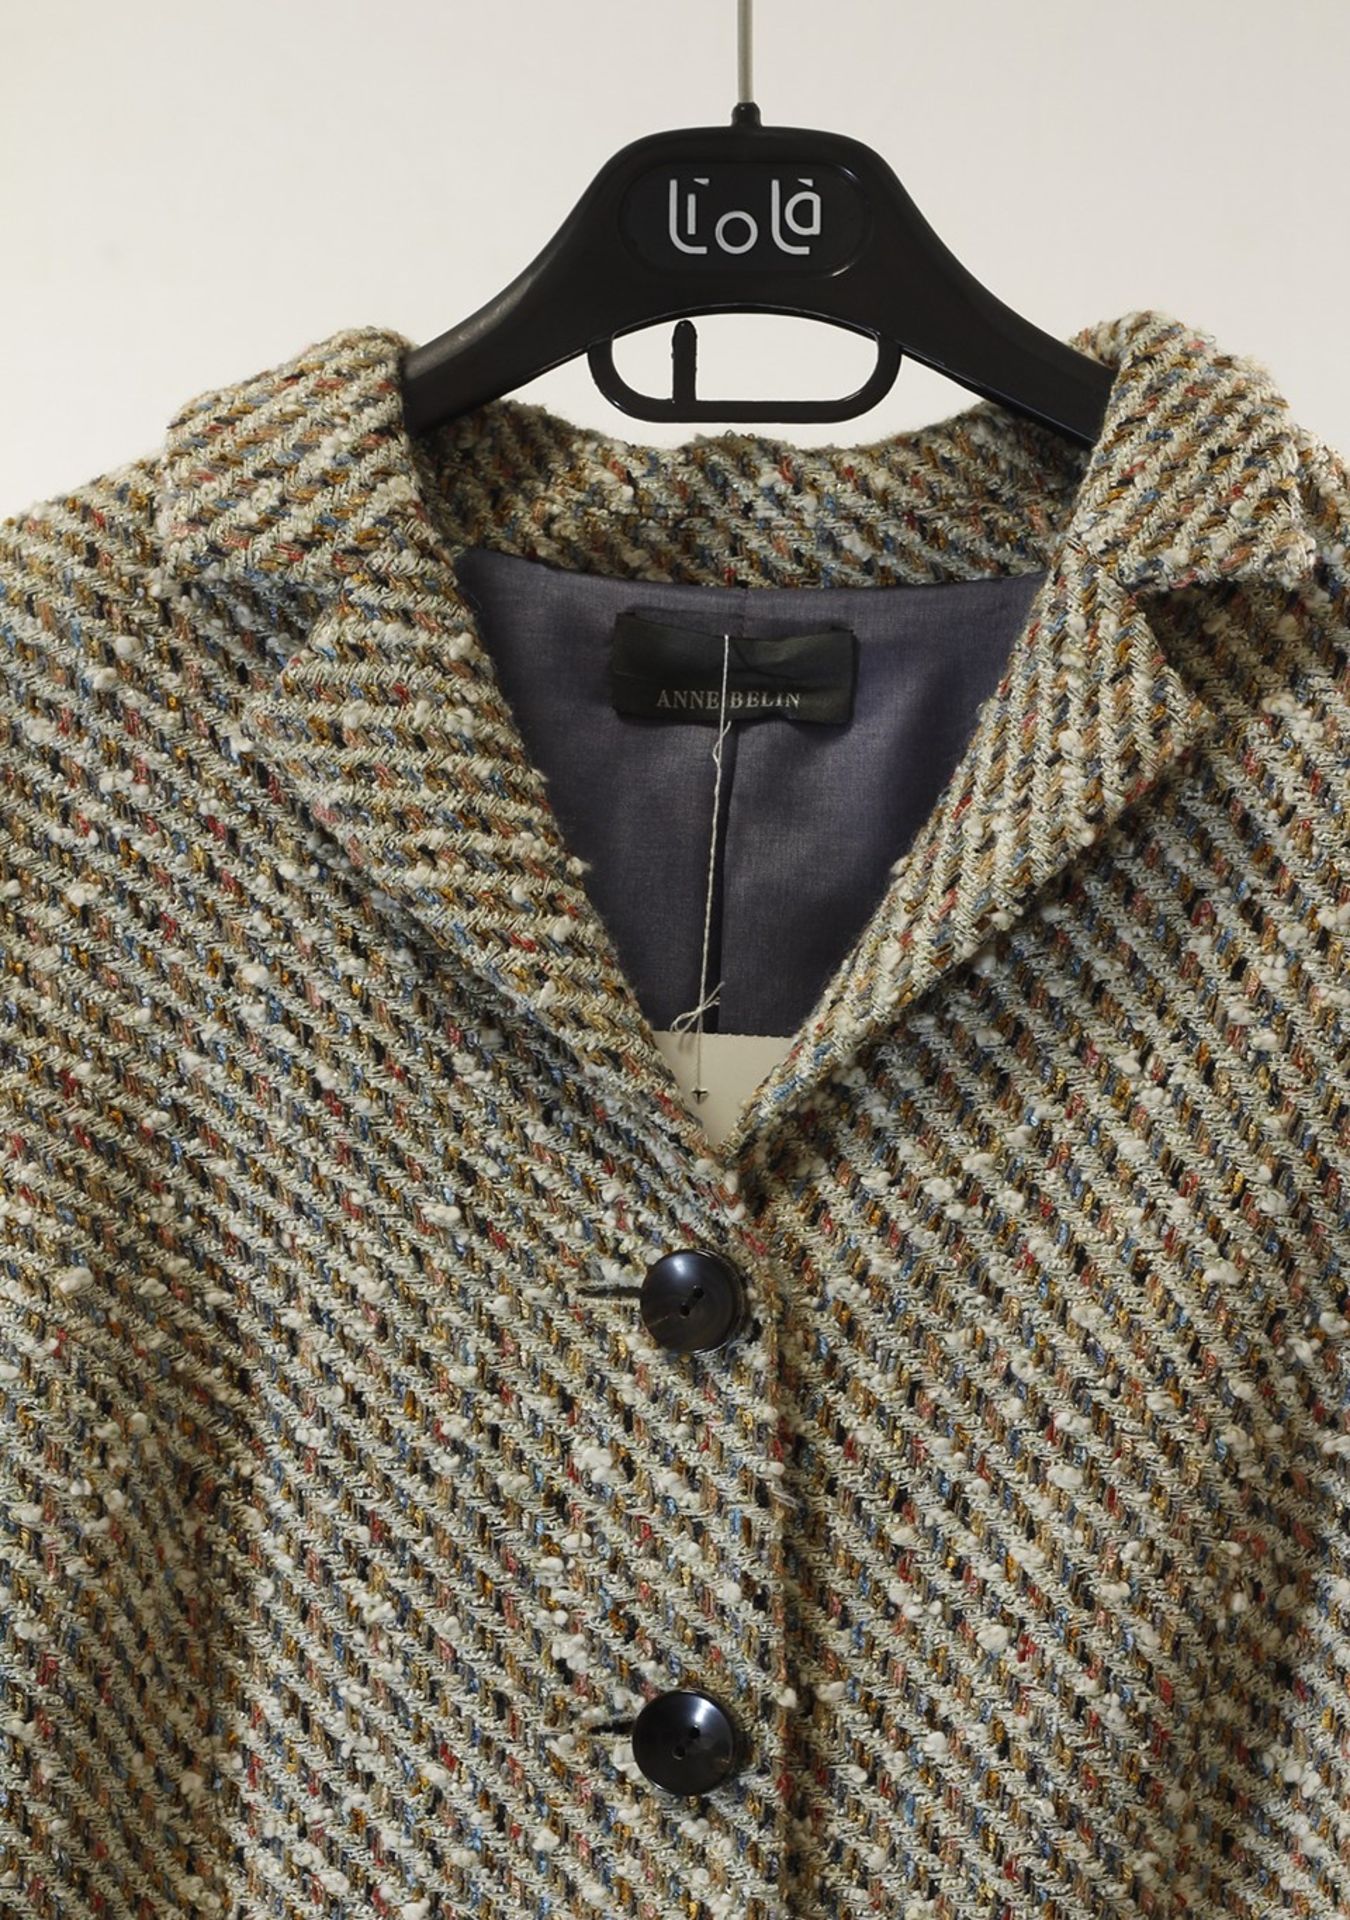 1 x Anne Belin Multicolour Tweed Jacket - Size: 24 - Material: 50% Polyacrylic, 25% Viscose, 25% - Image 3 of 6